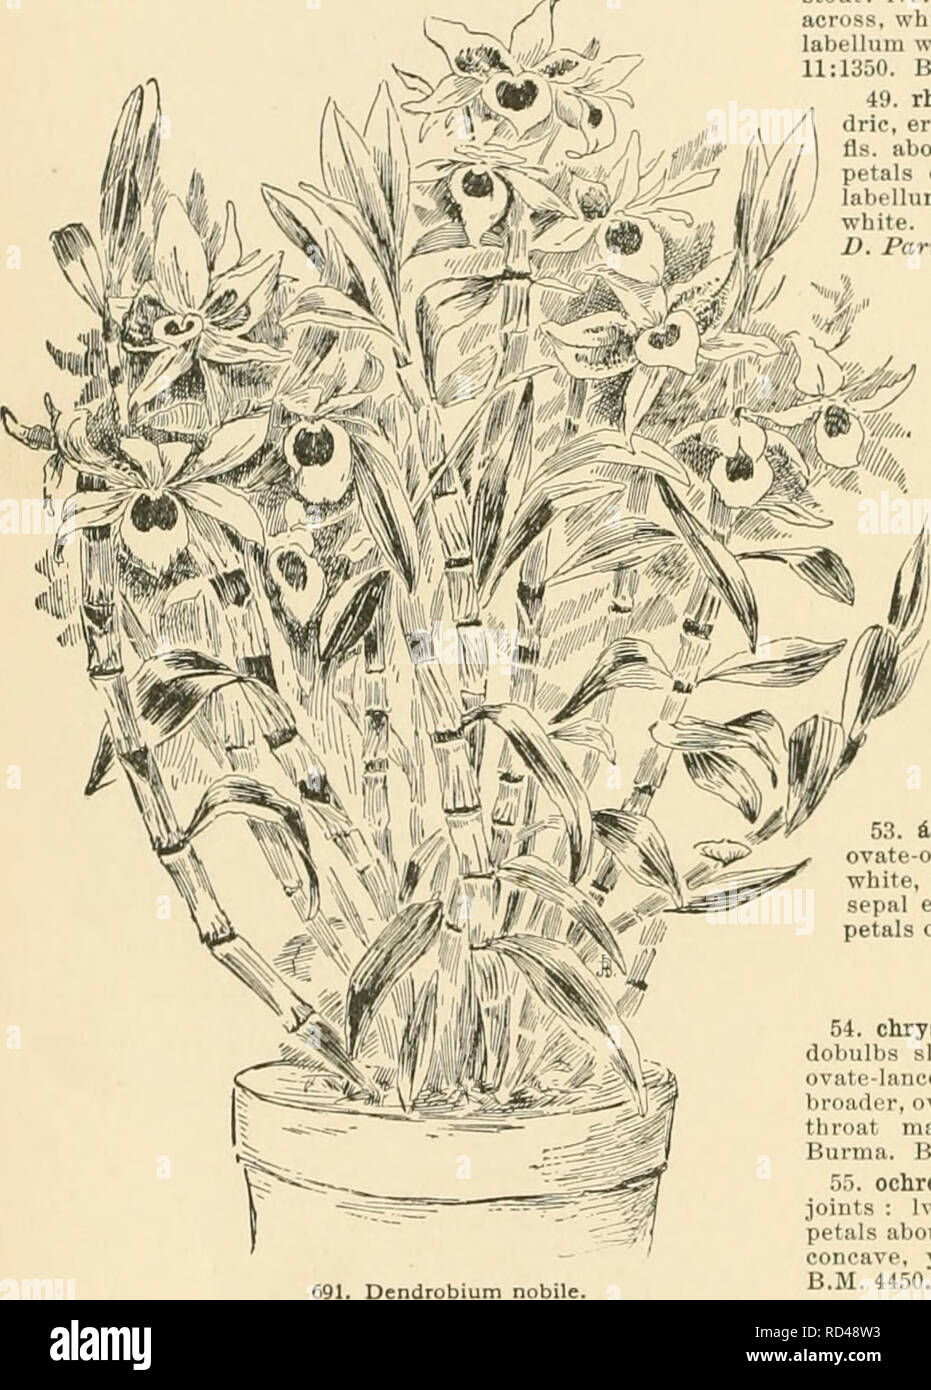 . Cyclopedia of American horticulture, comprising suggestions for cultivation of horticultural plants, descriptions of the species of fruits, vegetables, flowers, and ornamental plants sold in the United States and Canada, together with geographical and biographical sketches. Gardening. 470 DENDROBIUM DDD. Petals and sepals re 43. nAbile, Lindl. Fig. 691. Stems stout: Ivs. oblong: sepals and petals white, suffused with rose at the apices; labellum white, with a blotch of amethyst-purple at dis- tal end, throat dark crimson. Himal., China. G.C. 11. 11:565:111.23:341. J.H. III. 34:295. R.B. 23:2 Stock Photo